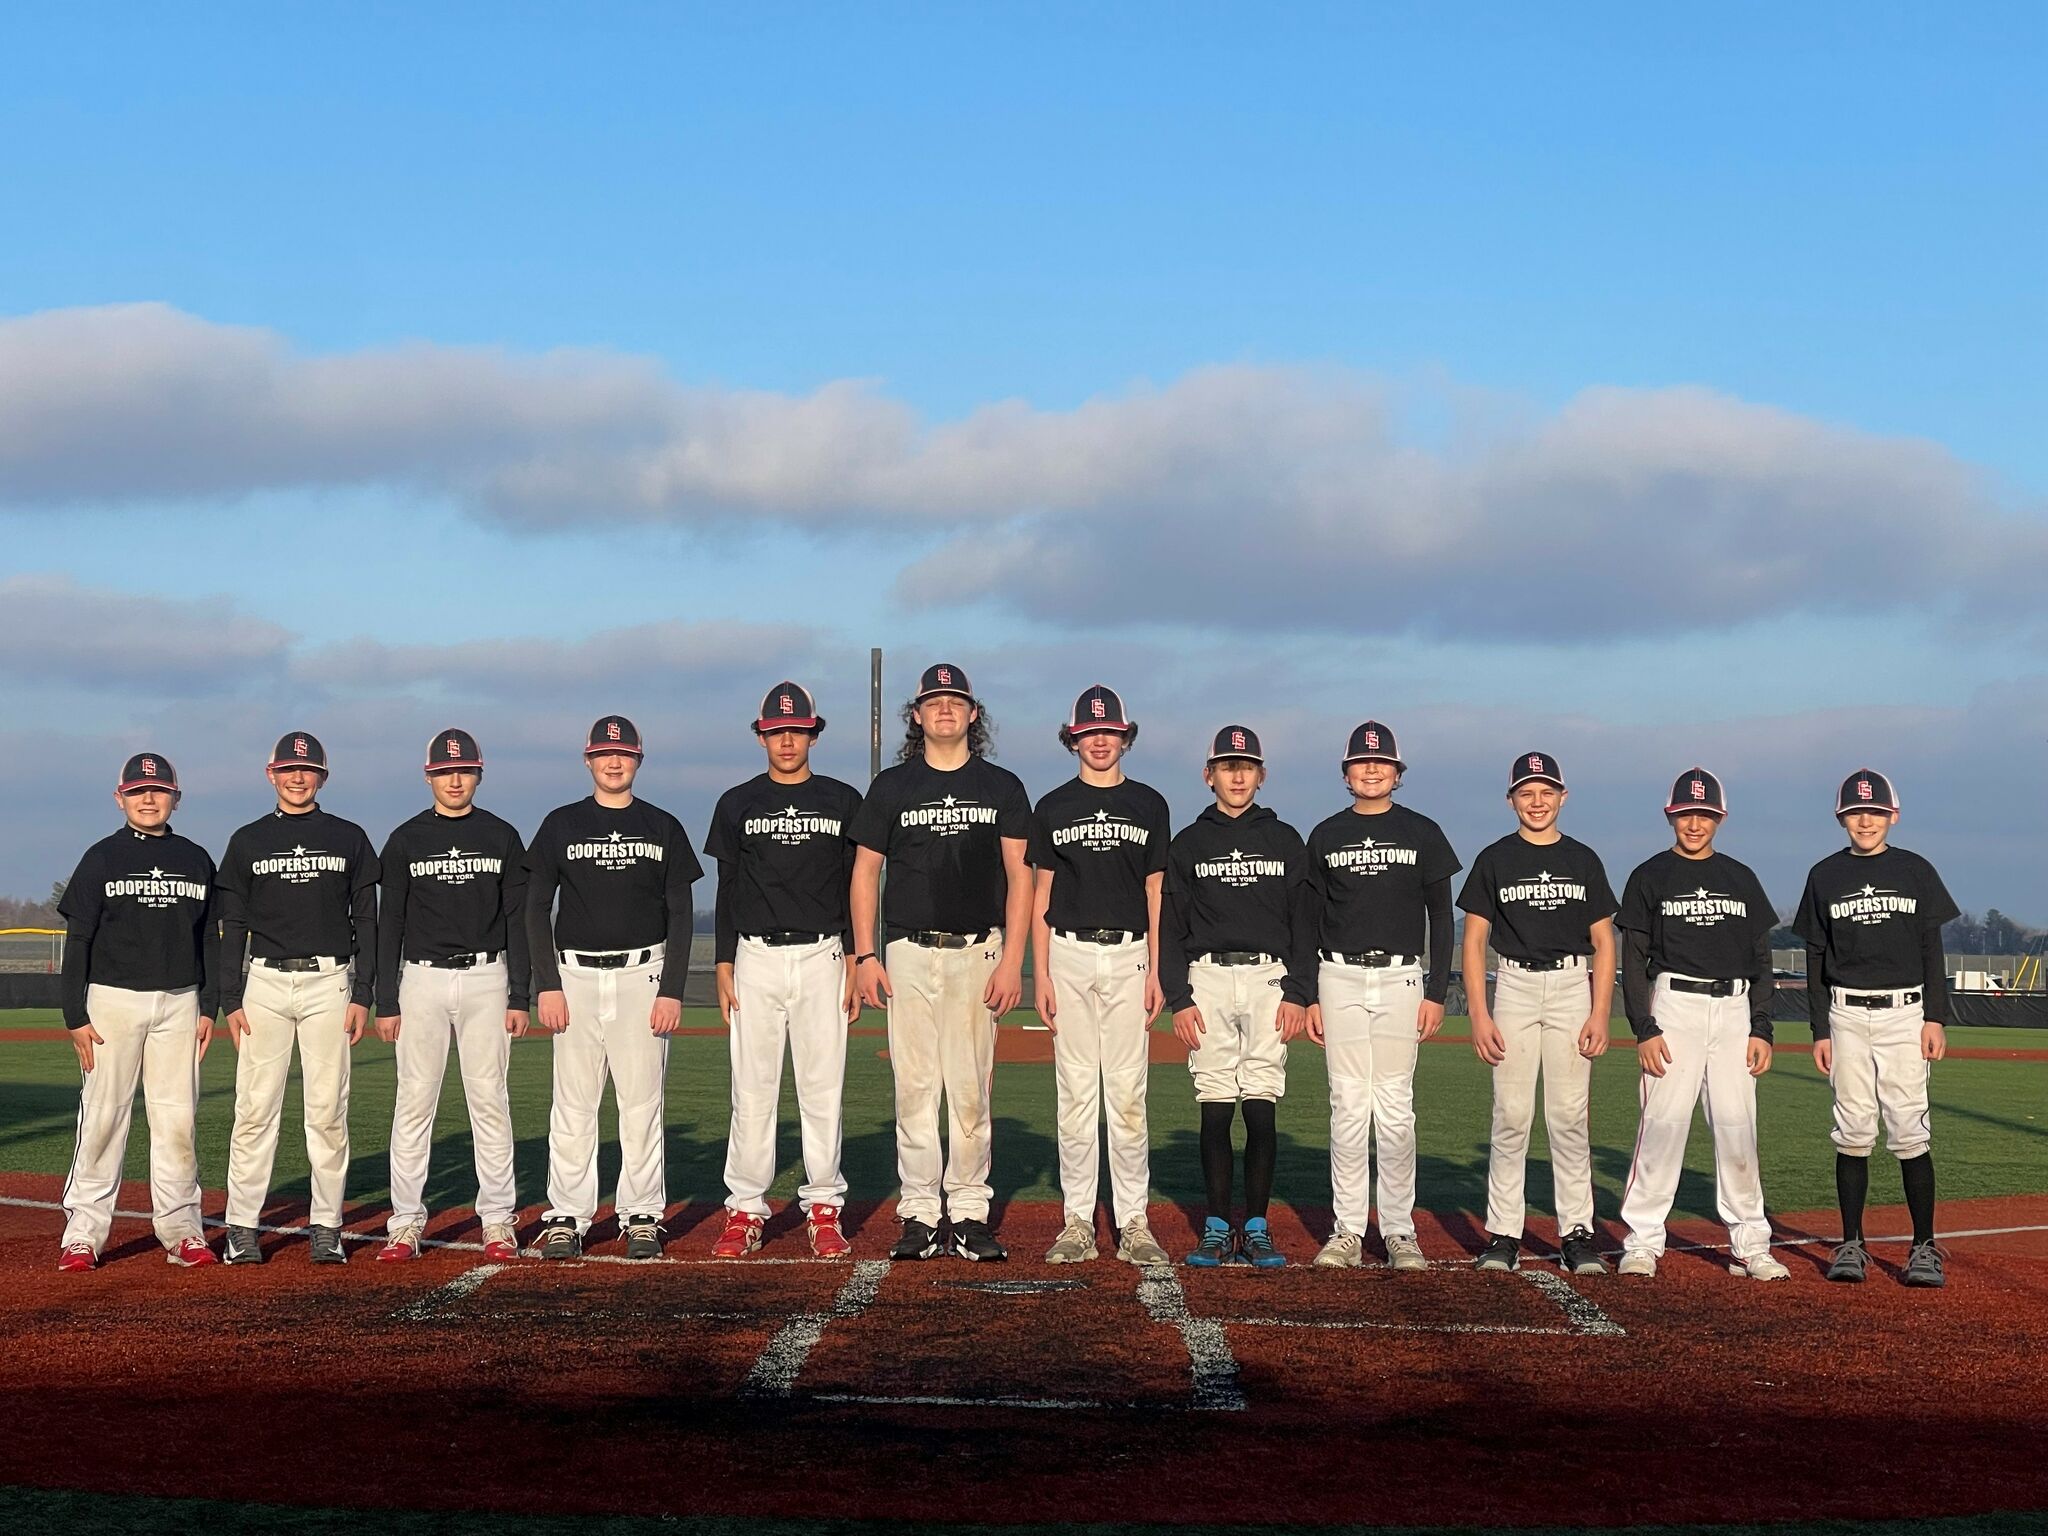 Jacksonville youth team fundraising for Cooperstown tournament